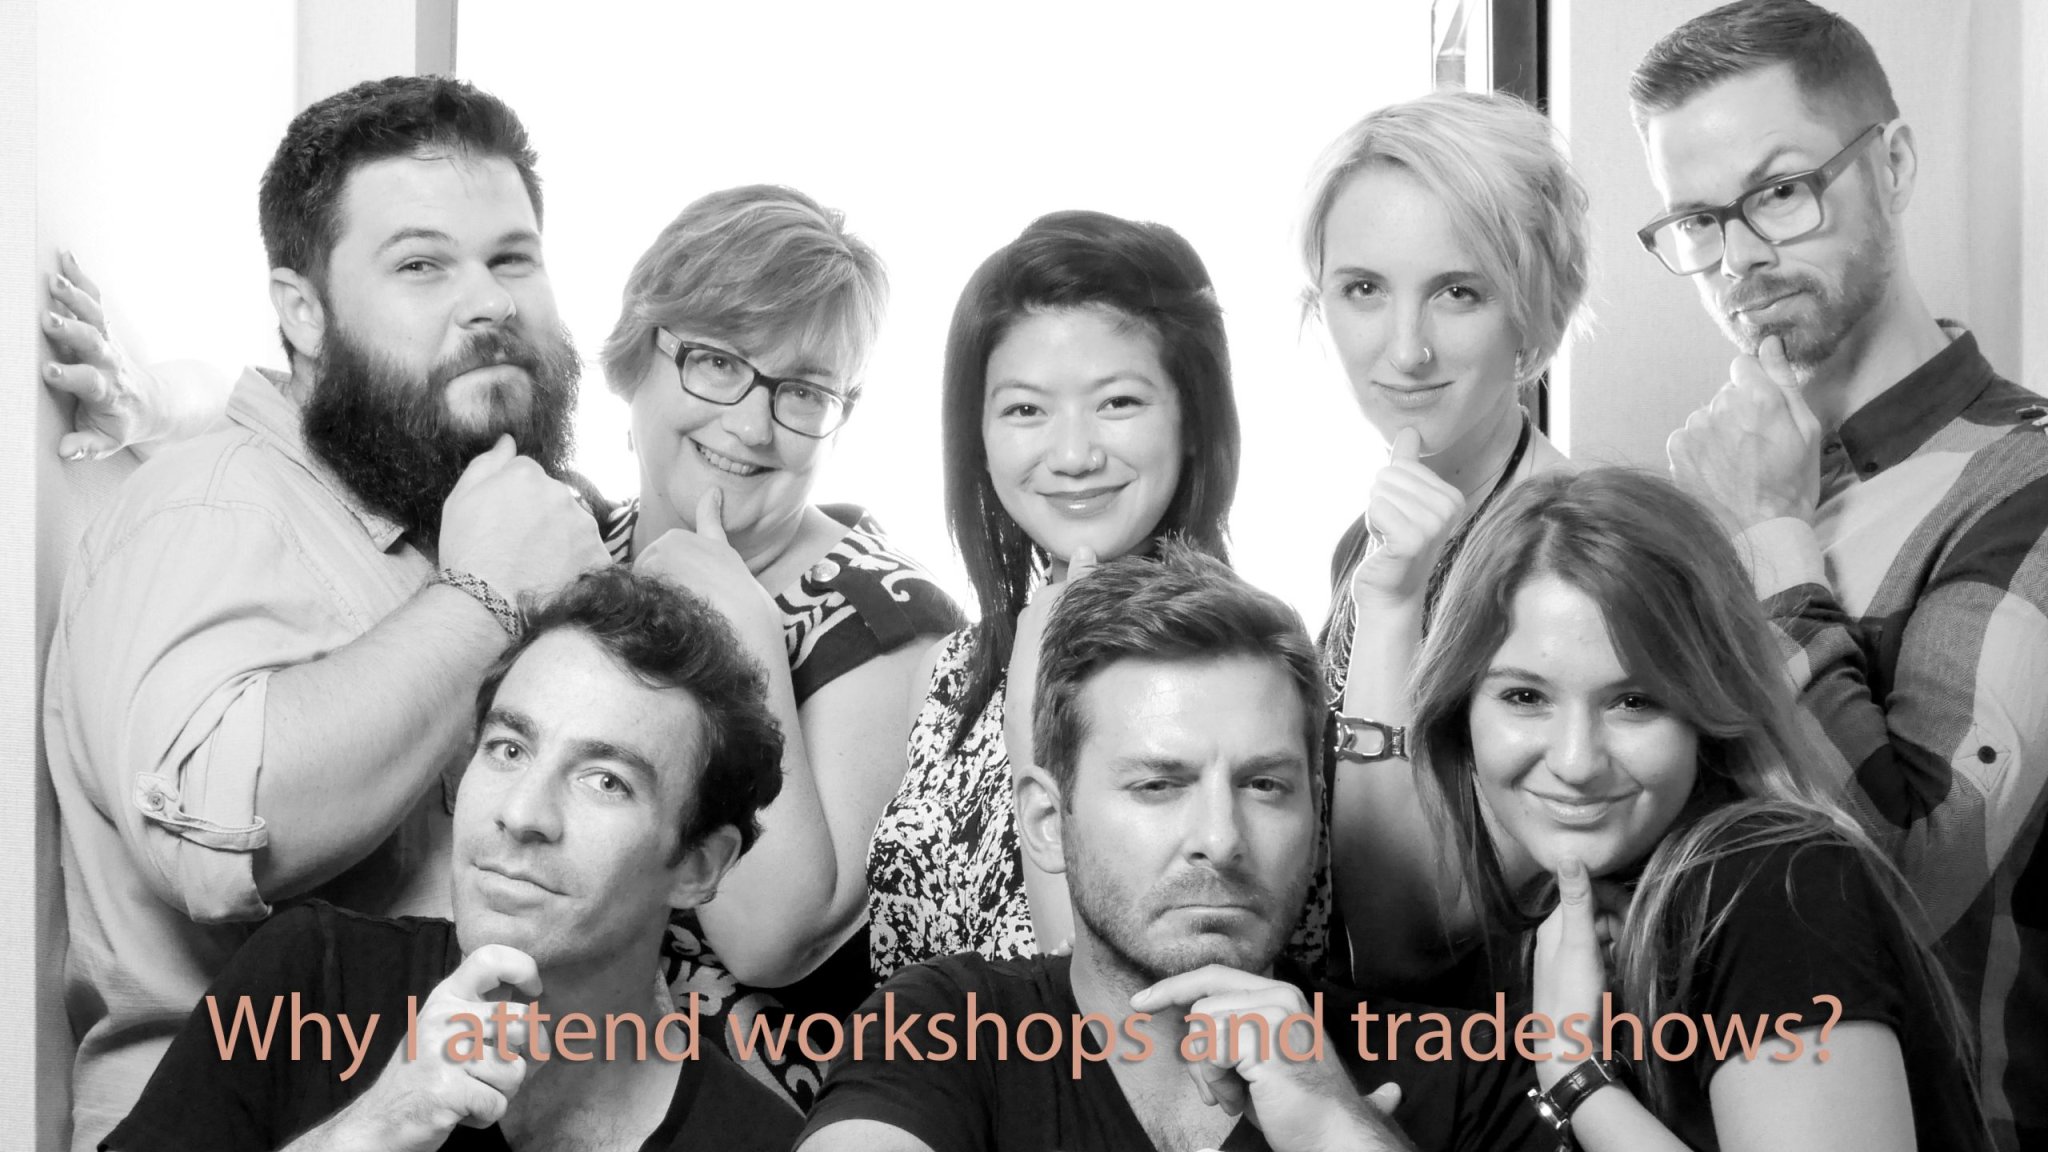 Why I Attend Workshops and Tradeshows?